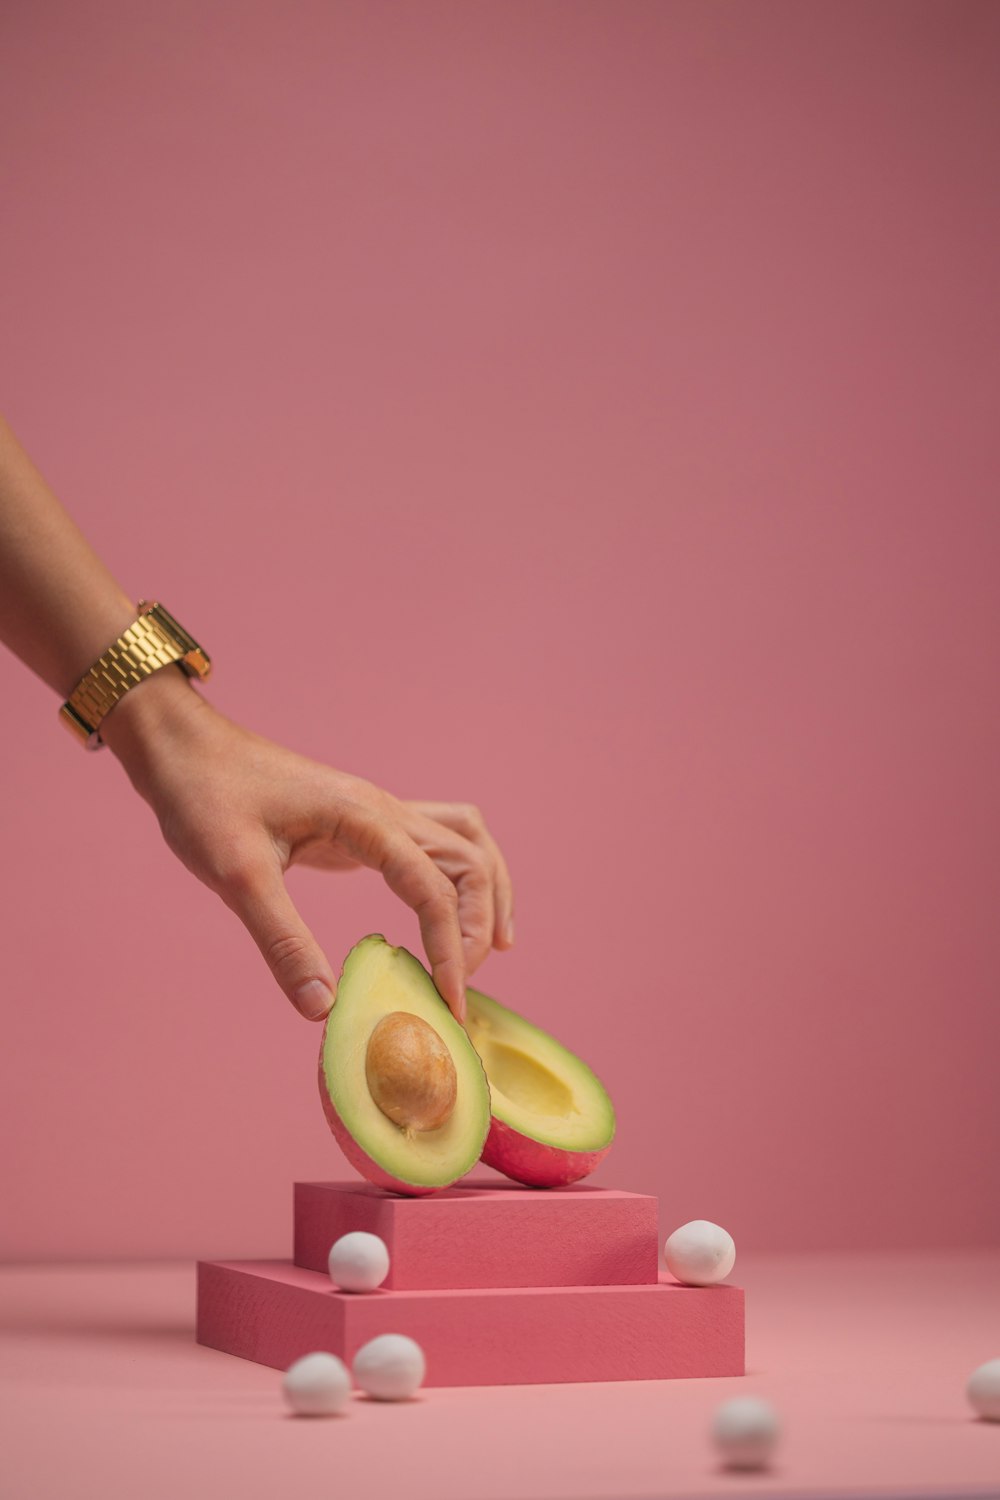 a woman is peeling an avocado on a pink surface